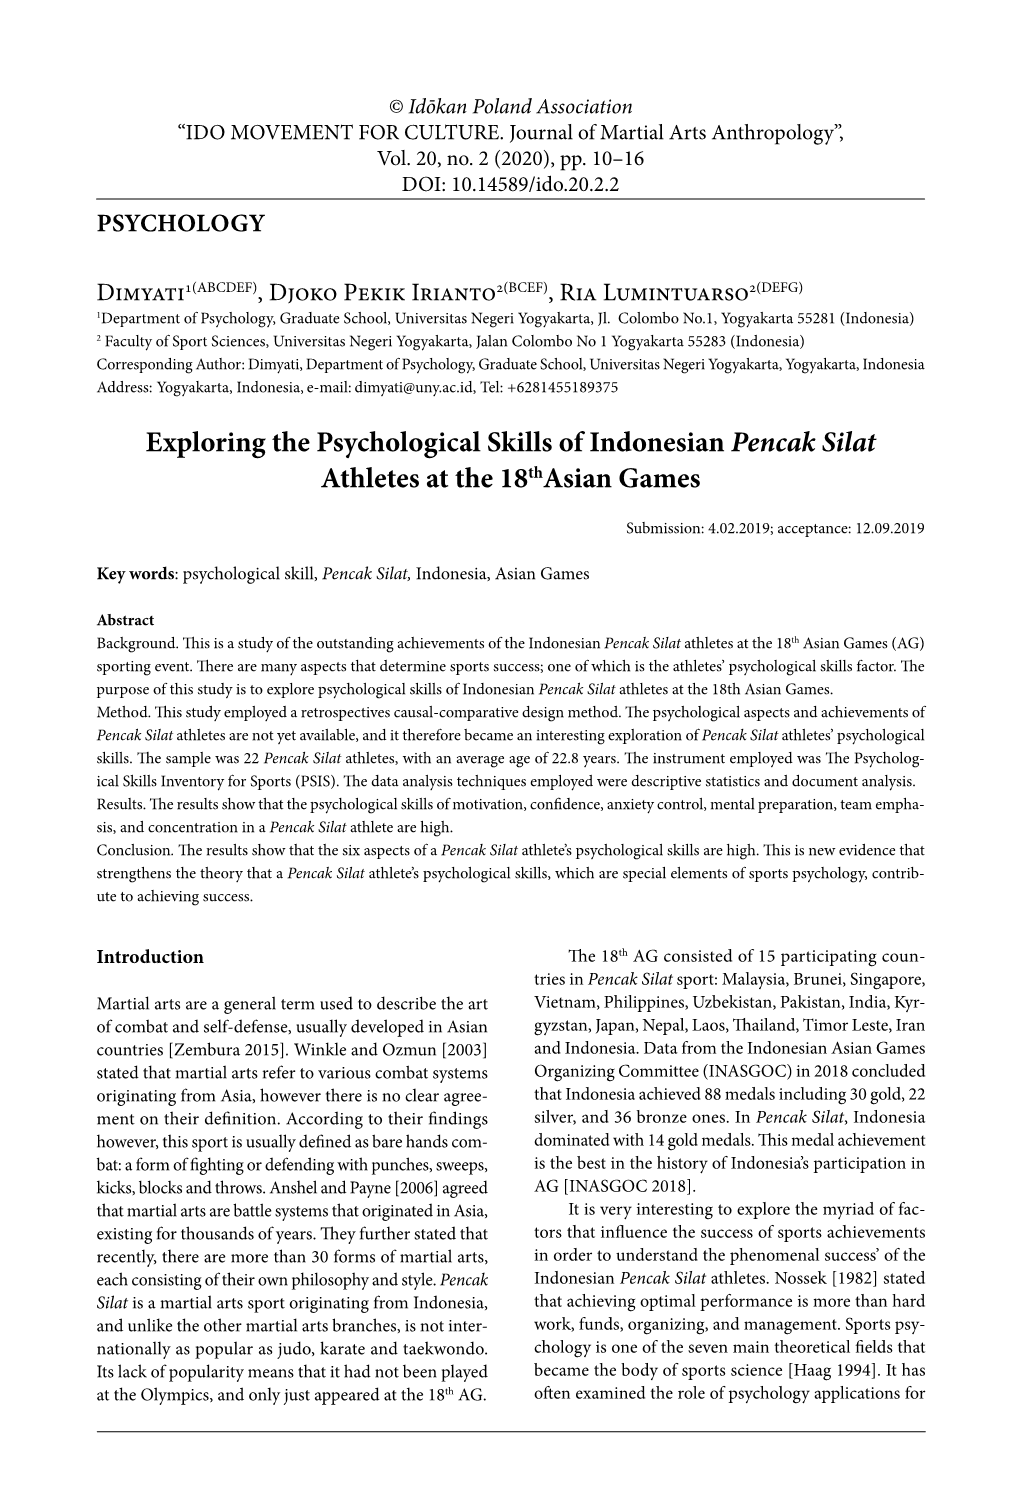 Exploring the Psychological Skills of Indonesian Pencak Silat Athletes at the 18Thasian Games